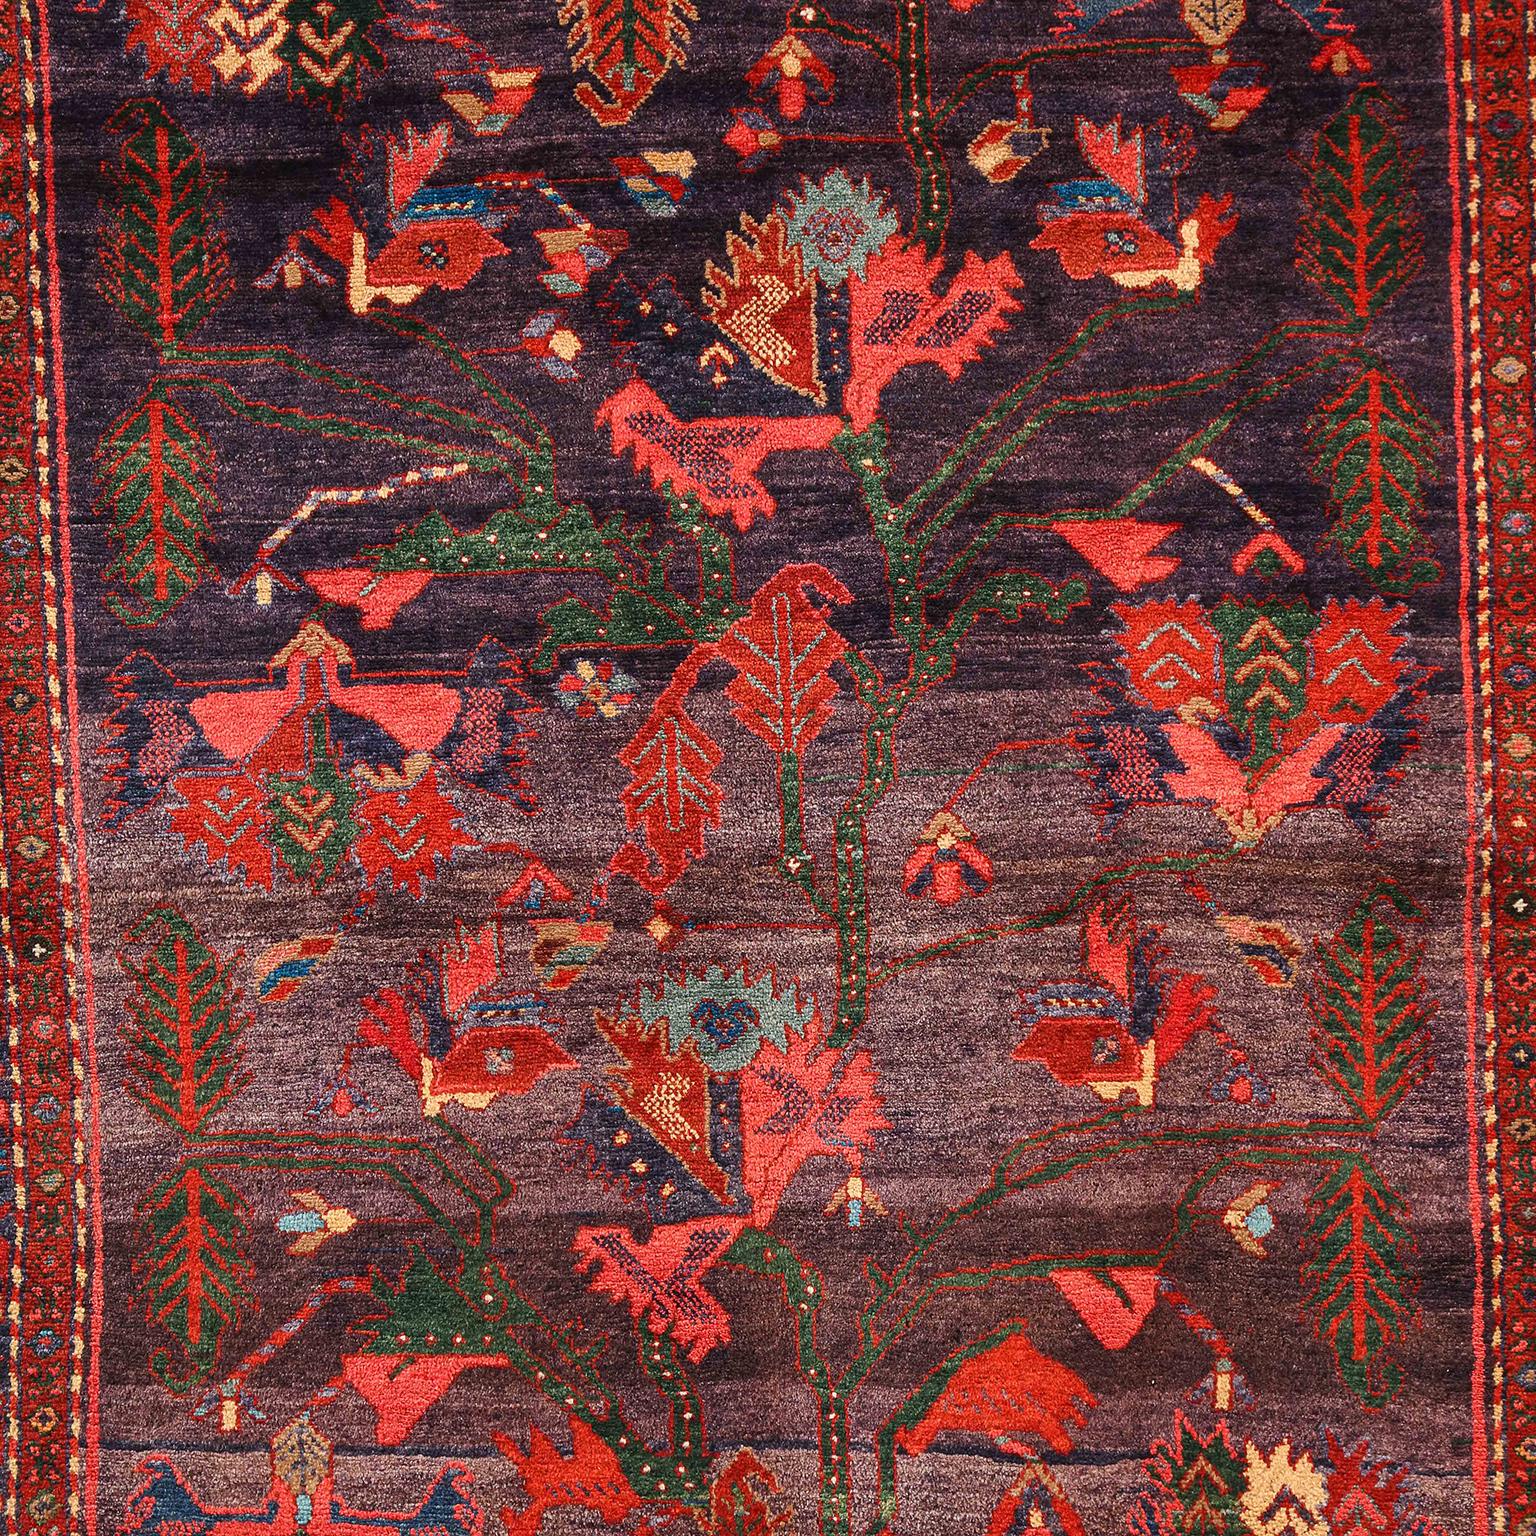 This antique Saveh Persian carpet, circa 1910, handknotted in pure handspun wool features a unique tree of life design. Composed of an overall field and multi-layered border, organic vegetable dyes produced the rich colors found within its design.